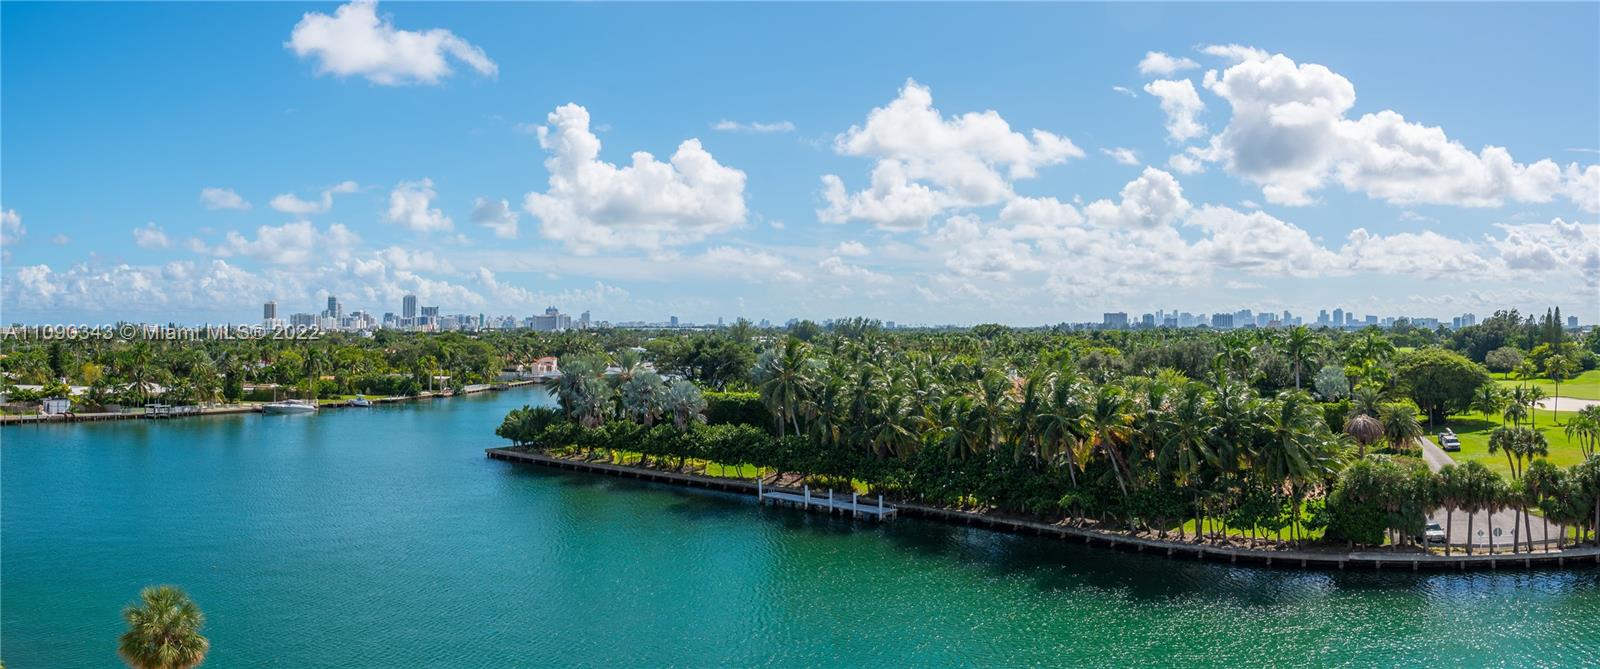 Now is your opportunity to purchase 2,970 sq. ft. in Bay Harbor Islands entirely remodeled Herbert Mathes Blair House. Combined Unit #7C/D features 4 bedrooms, stunning water, golf, and skyline views along with 3 full bathrooms and 2 half baths. Floor plan available in #3D via Matterport showing 2 distinct and updated units! Perfect for a complete home office, an in-law suite, rent out the smaller unit to pay the mortgage, or go all out and design a 1,000 sq. ft. massive master suite with walk-in closets and midnight kitchen! All of this is possible at half the price of new construction! Impact windows, washer dryer, 2 parking spaces, 2 storage rooms, pet friendly 2 Dogs allowed! Boutique building, doorman, massive waterfront pool, new gym! Maintenance includes A/C! No Special Assessments!